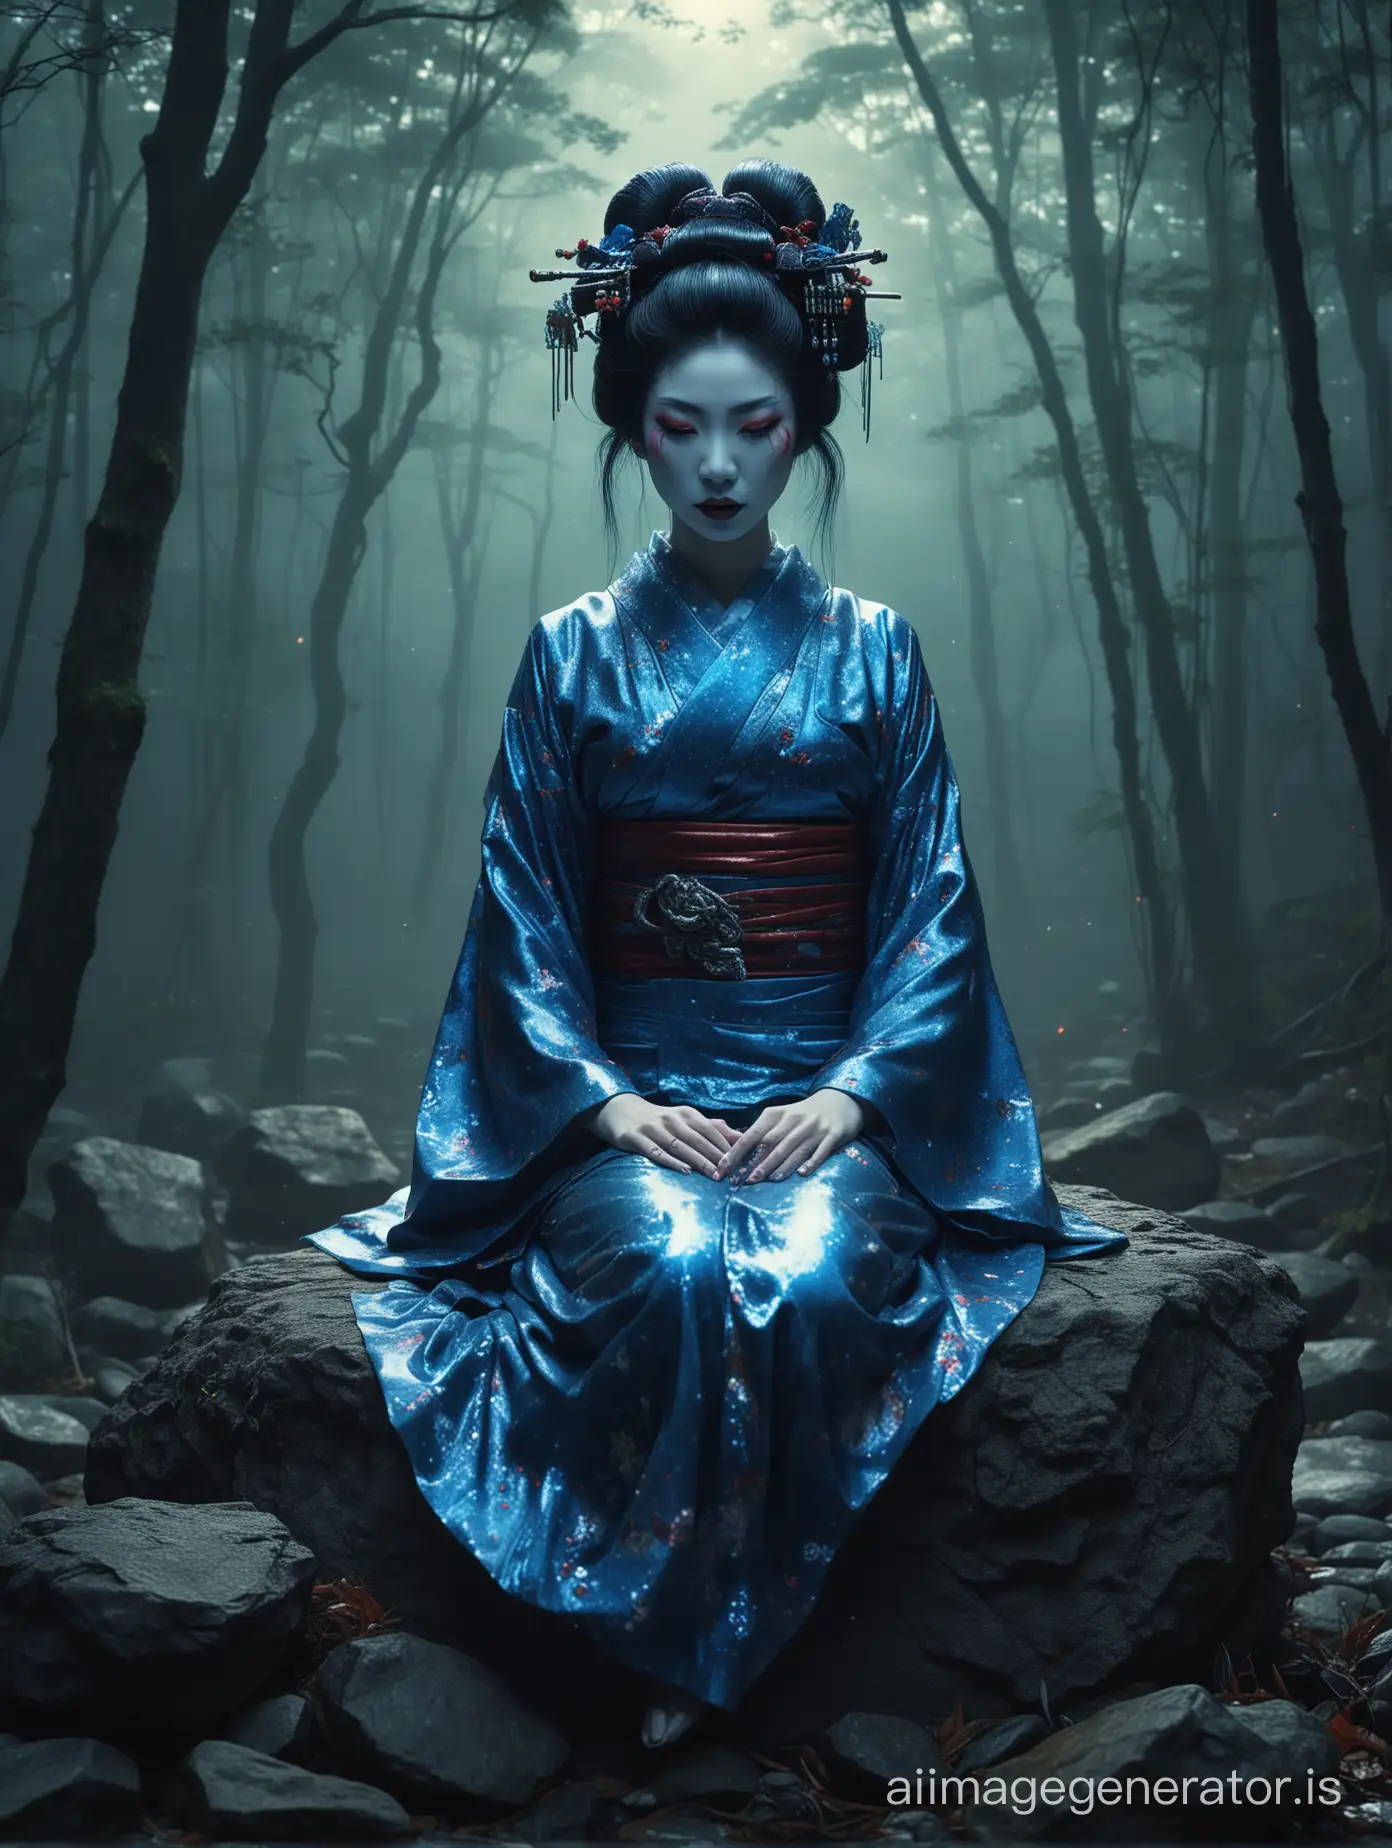 full horror night, holographic spirit, woman demon geisha floating over a rock, digital art, cgsociety winner, blue genie, Japanese demon geisha, in the forest of nightmares, occult aesthetics of alchemy, extremely detailed shot of a goddess, goddess of wrath, grunge, gothic, trapped in my mind, professional photography